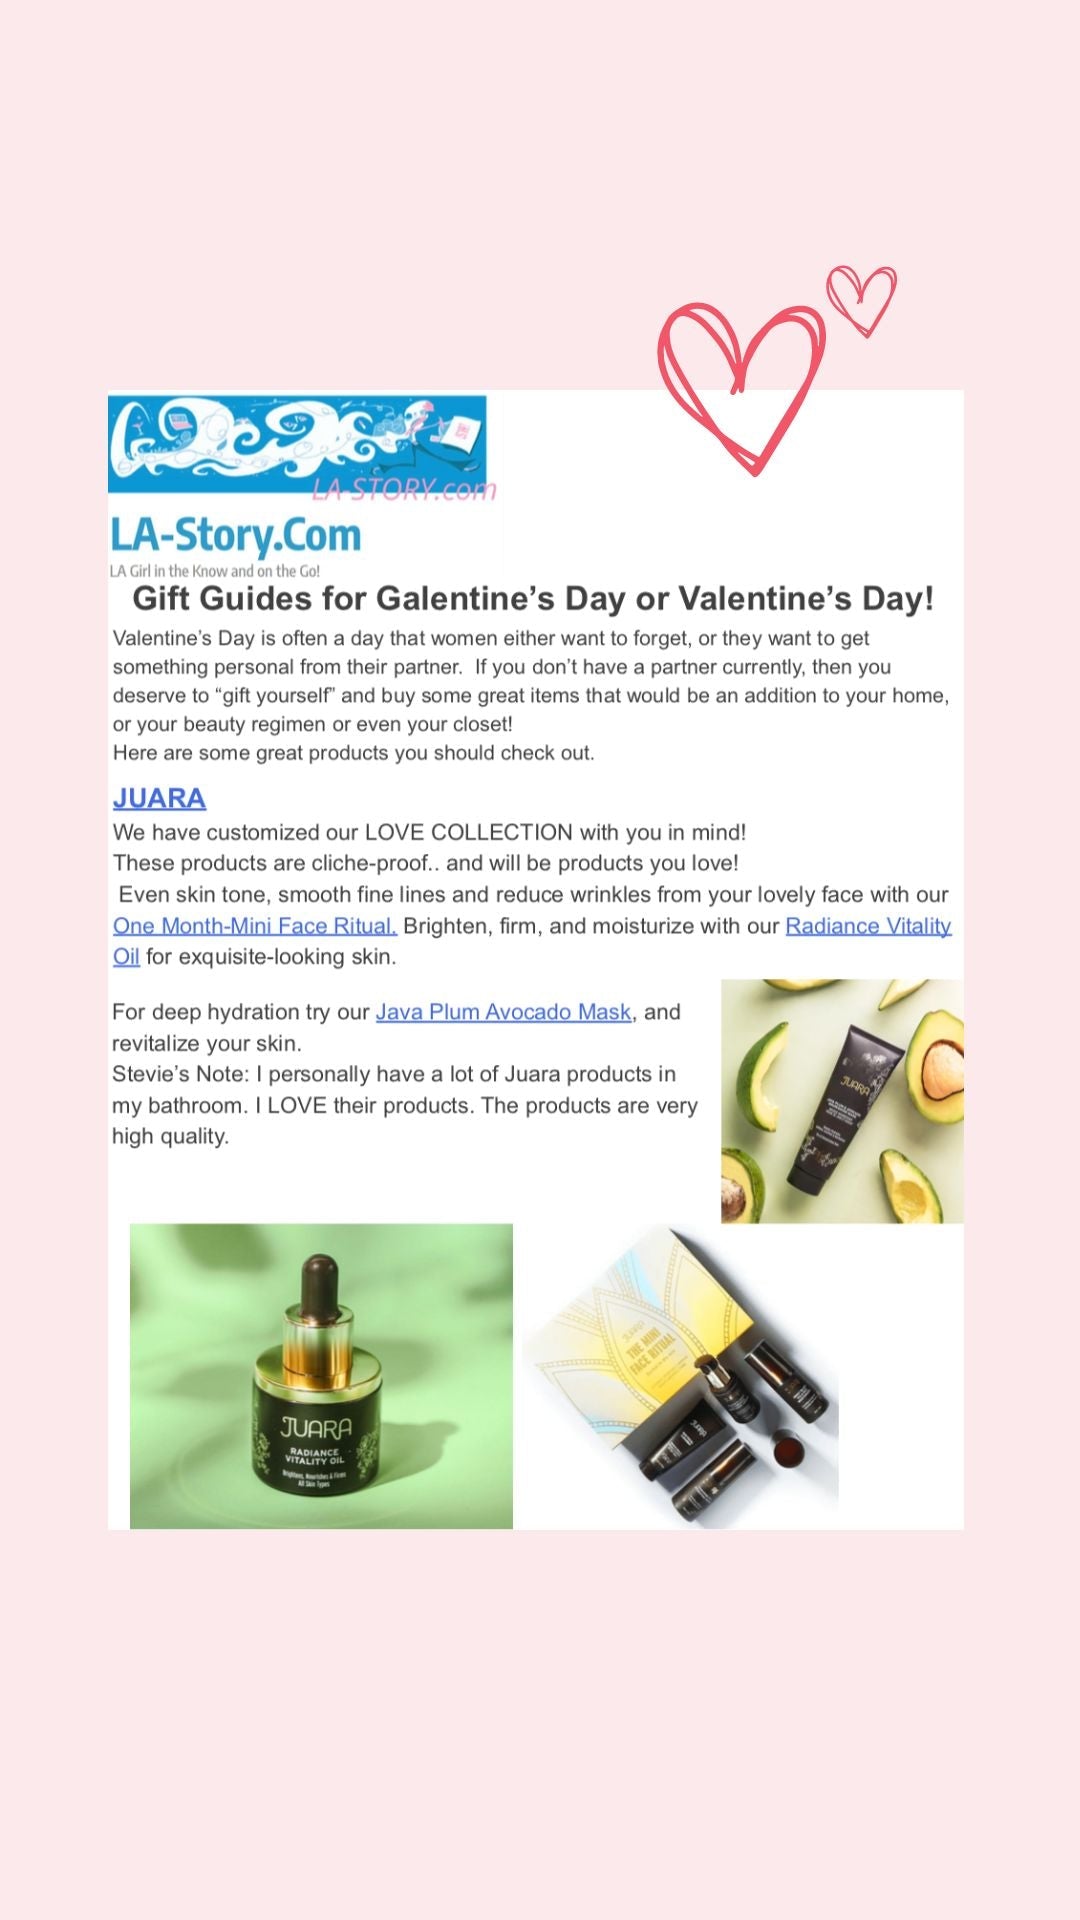 LA-STORY.COM: Gift Guides for Galentine’s Day or Valentine’s Day! JUARA Skincare